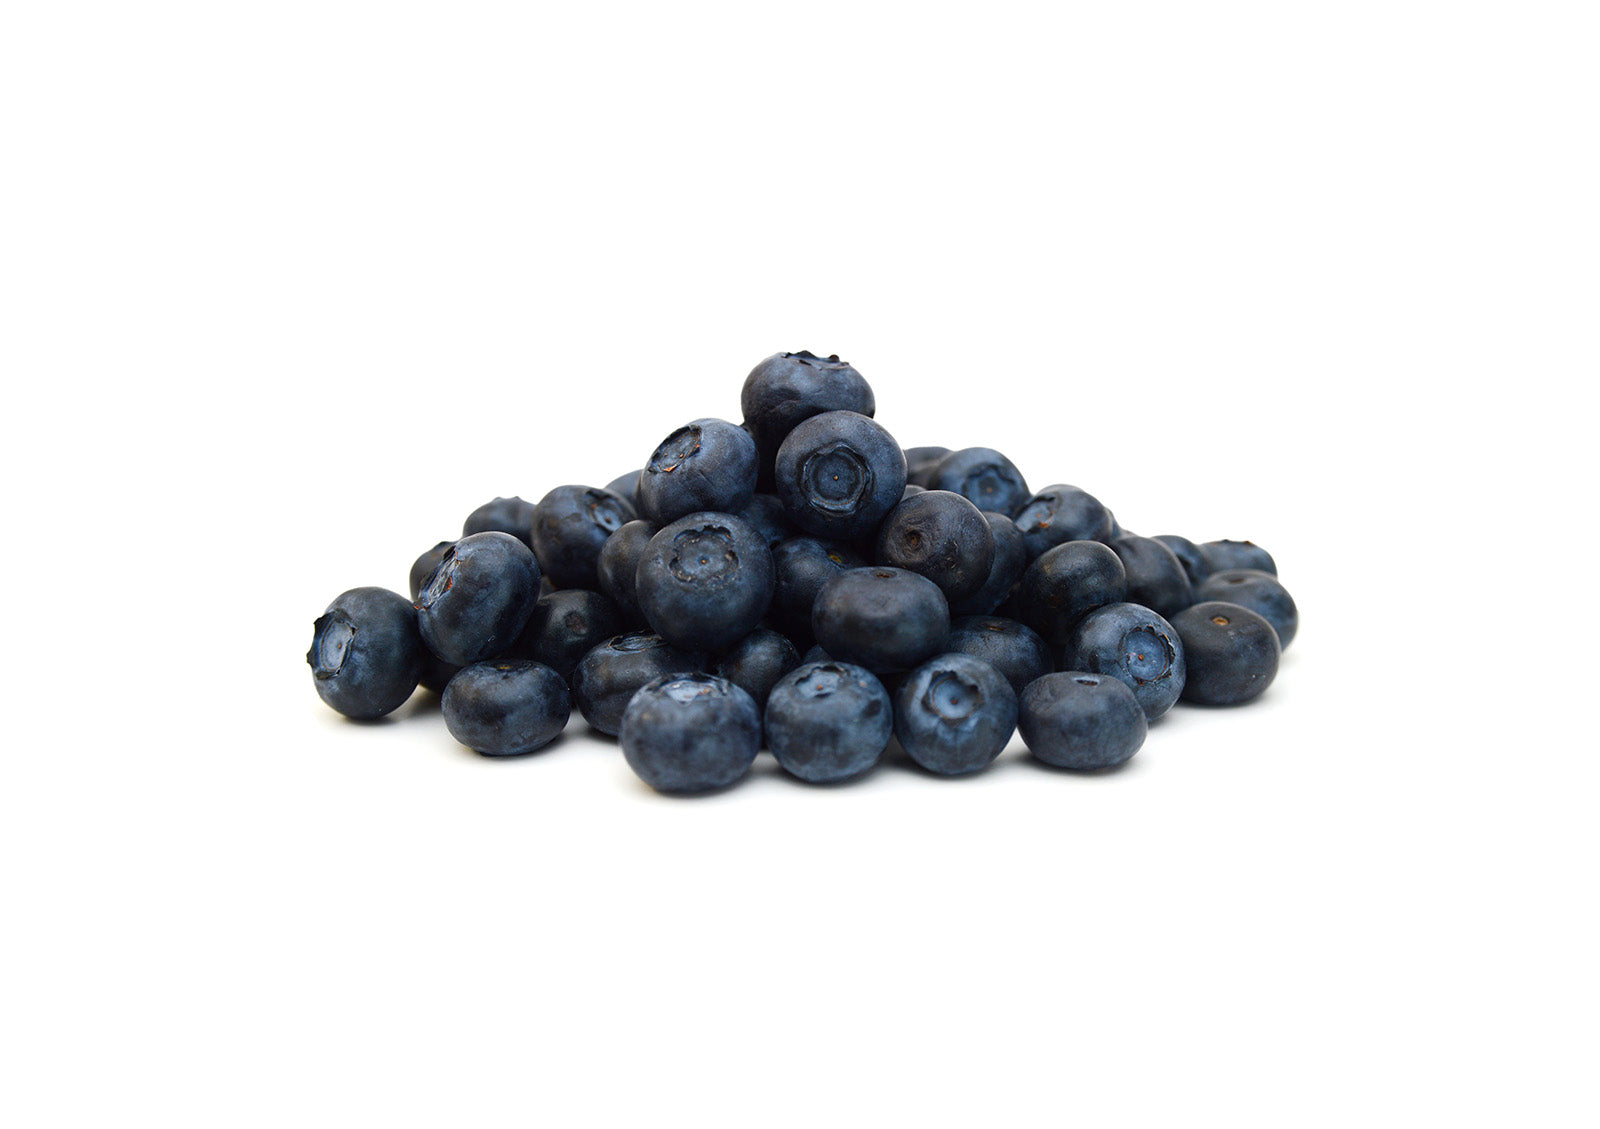 Blueberries Where to buy Fresh Veggies Vegetables Online Delivery Singapore Wholesale Fruits Vegetables for Cafes Hawkers and Restaurant Gifting Homebase Bakery  蓝莓